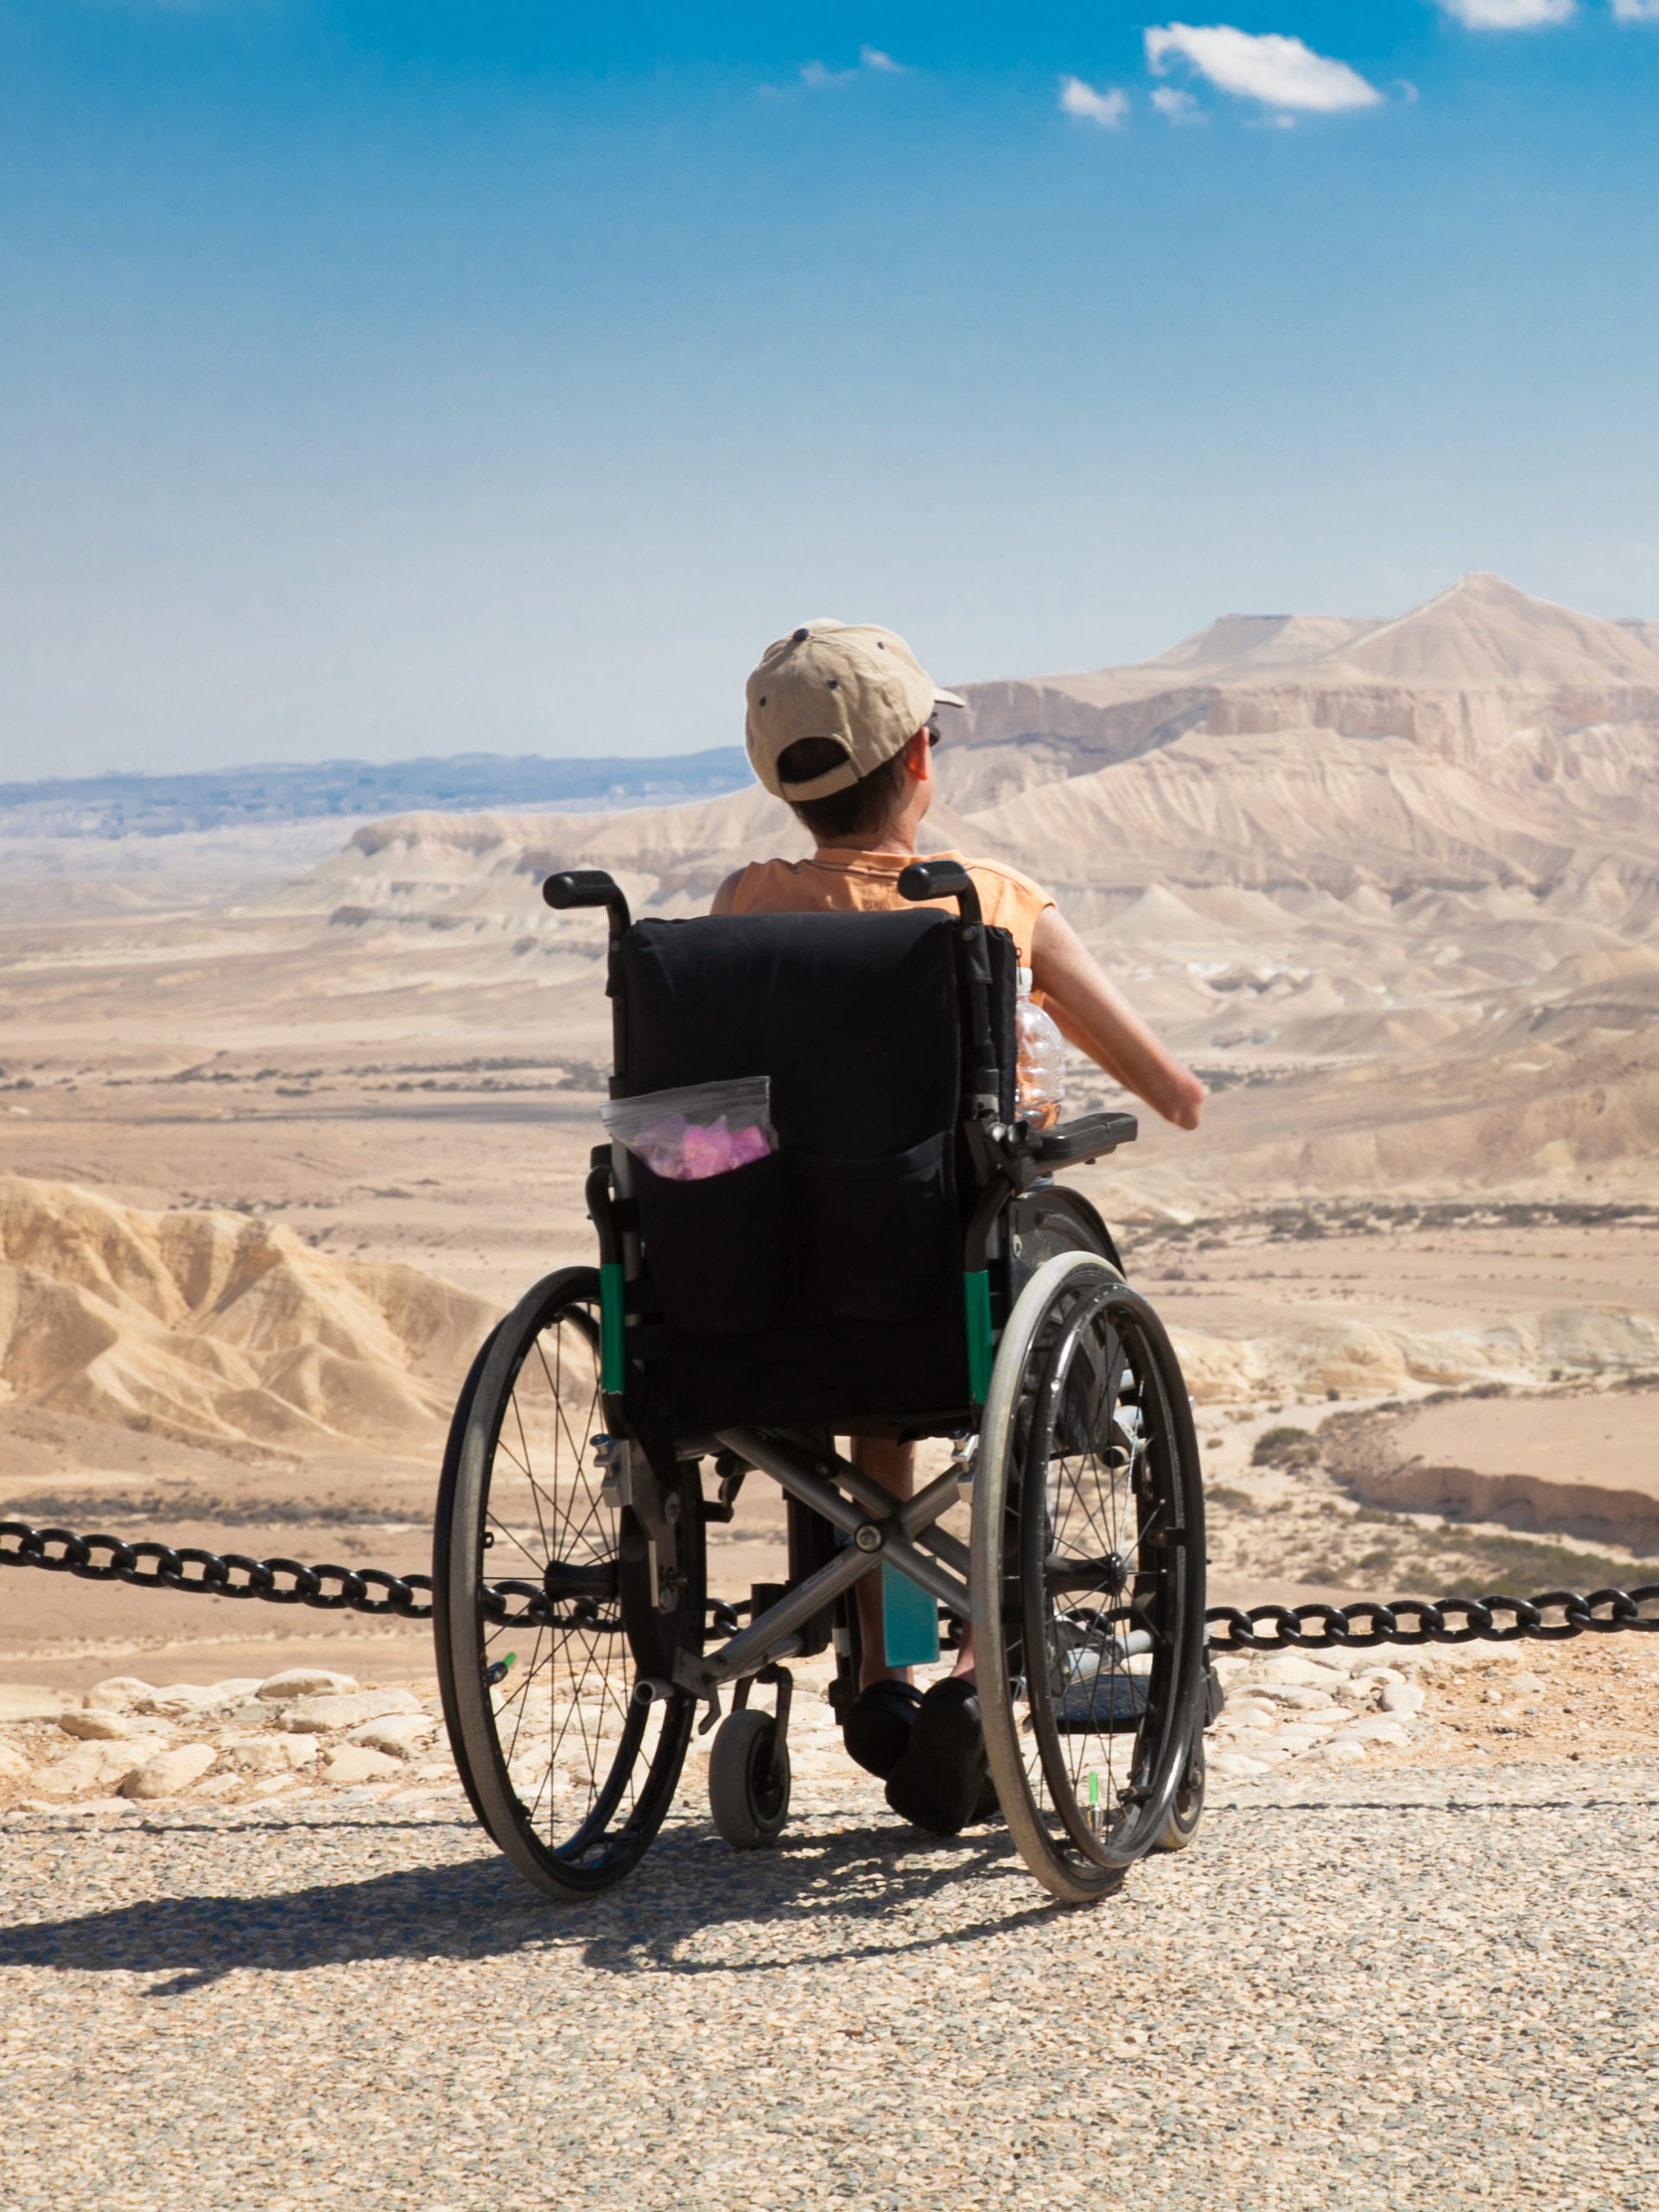 Young boy in wheelchair looking out at vista of desert